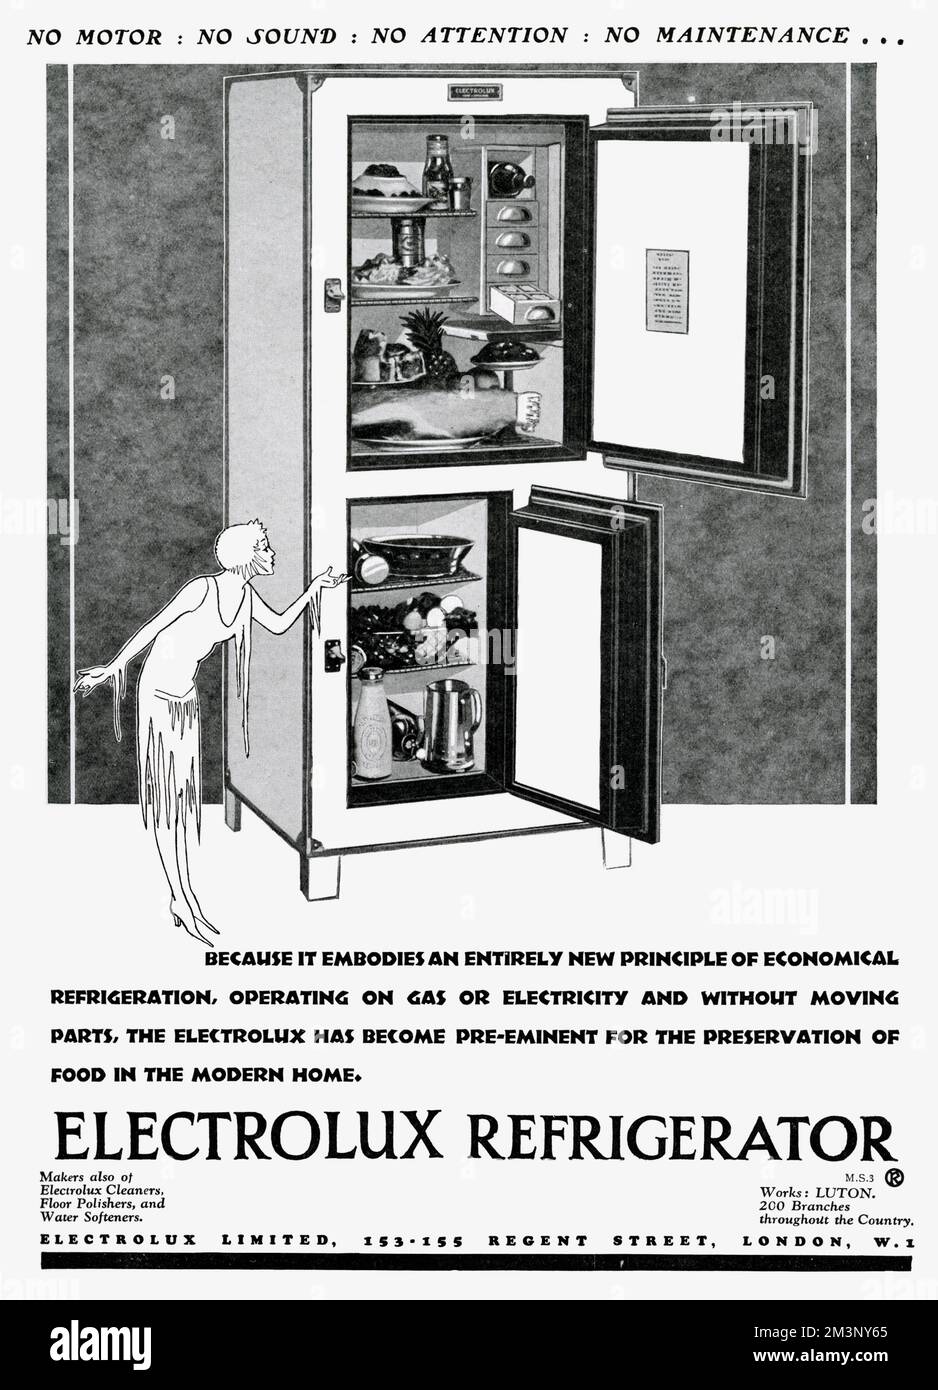 'No motor : no sound  : no attention : no maintenance. . . Because it embodies an entirely new priniple of economical refrigeration, operating on gas or electricity and without moving parts, the electrolux has become pre-eminent for the preservation of food in the modern home.     Date: 1928 Stock Photo